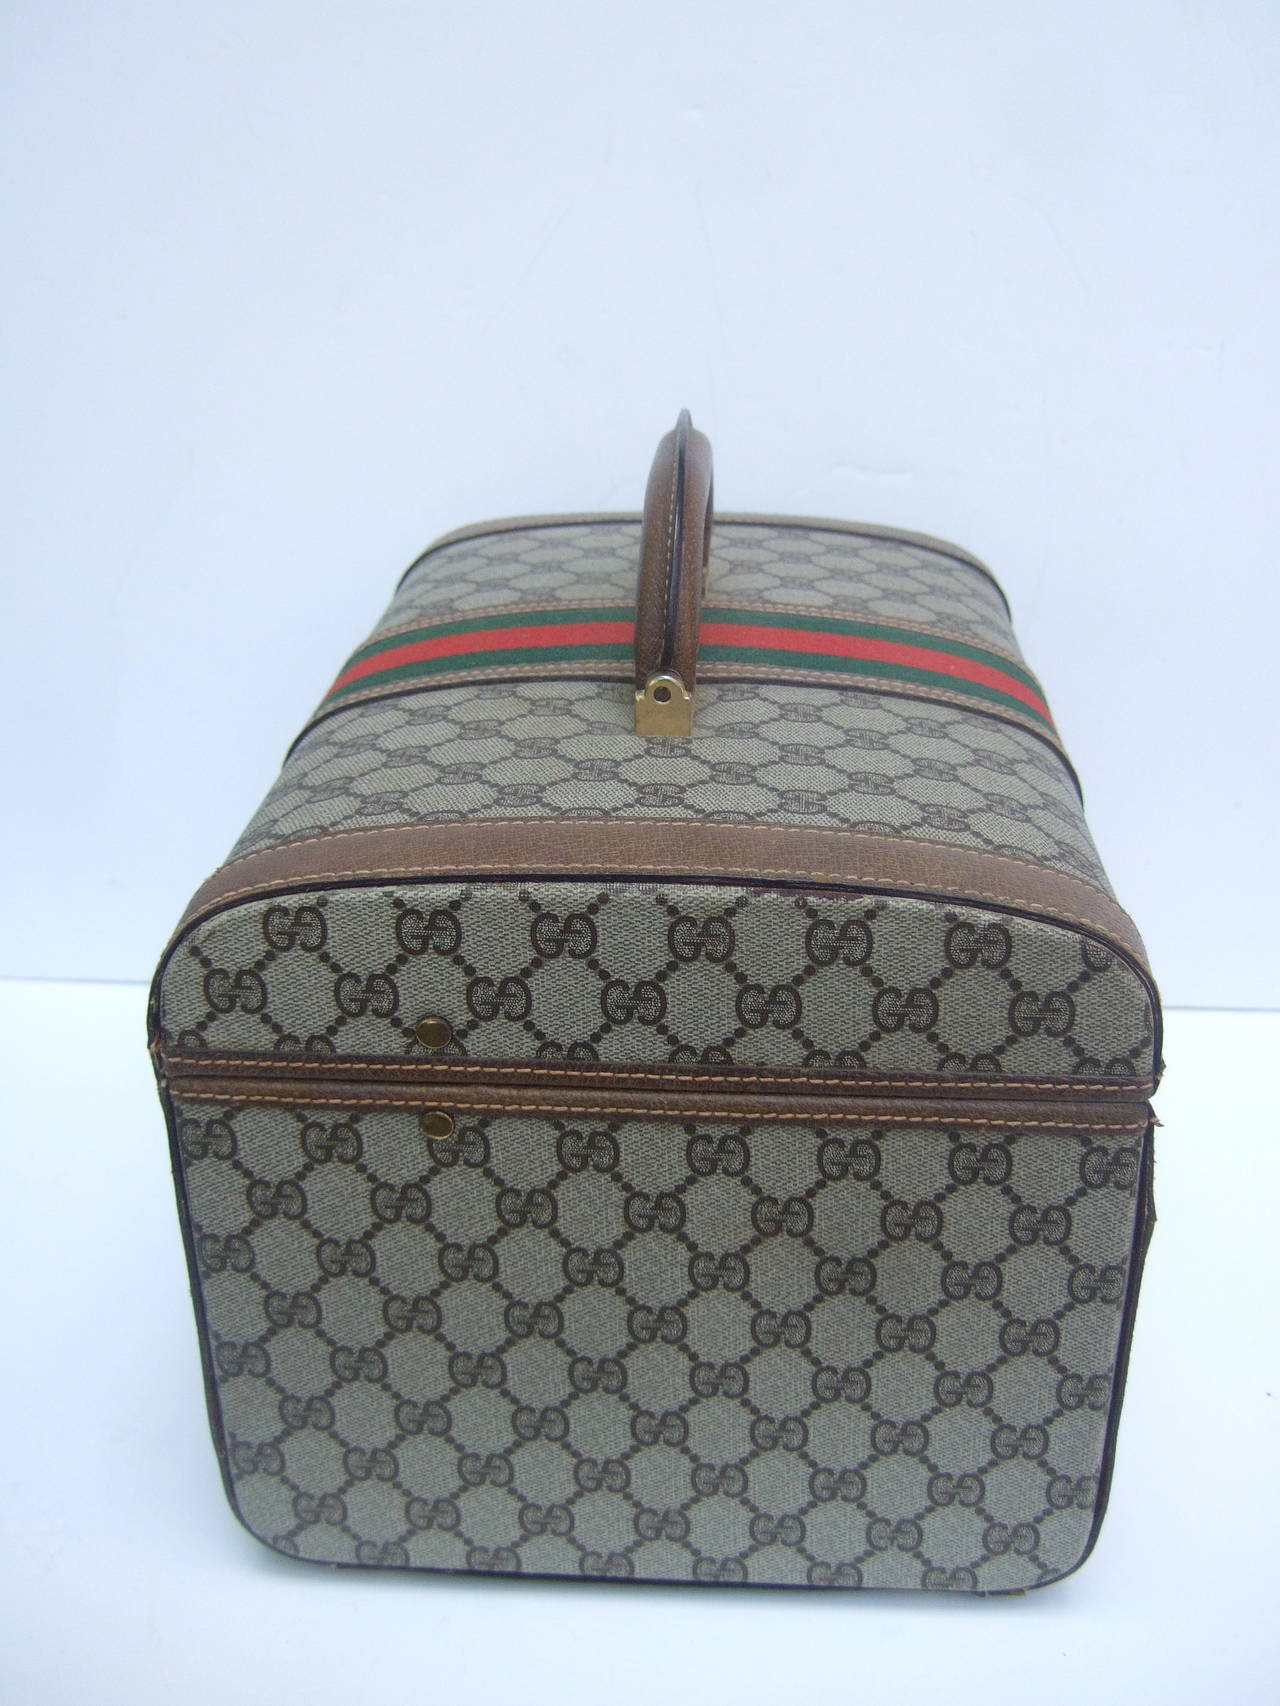 RESERVED SALE PENDING Gucci Luxurious Retro Travel Case Made in Italy c 1970s 2